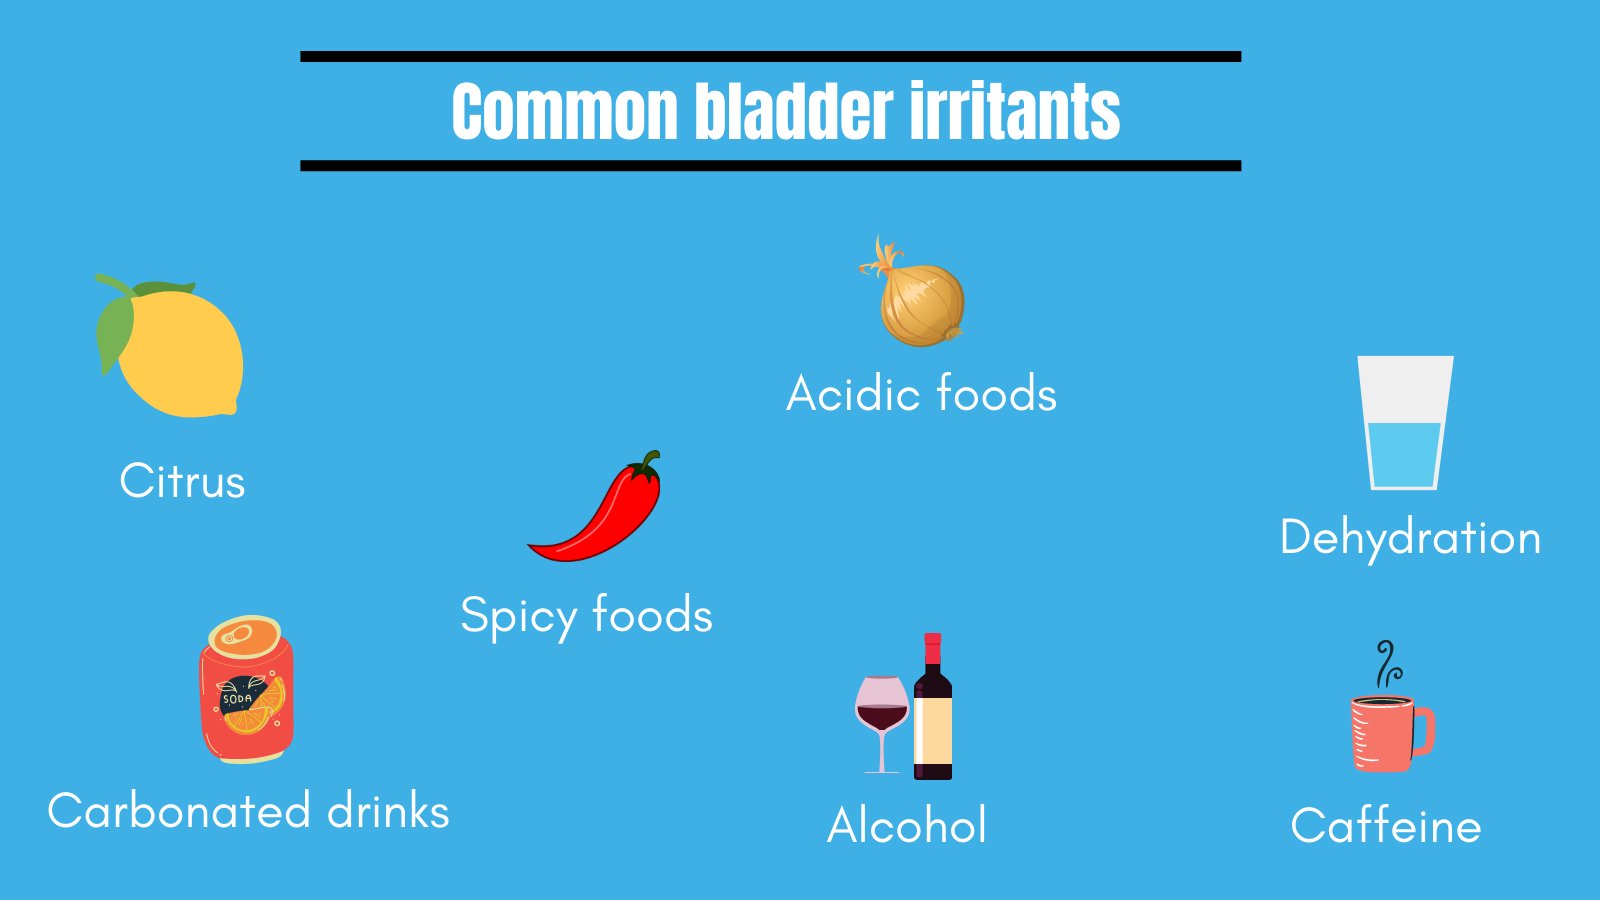 Bladder Irritants: Common Culprits, and How to Manage Them